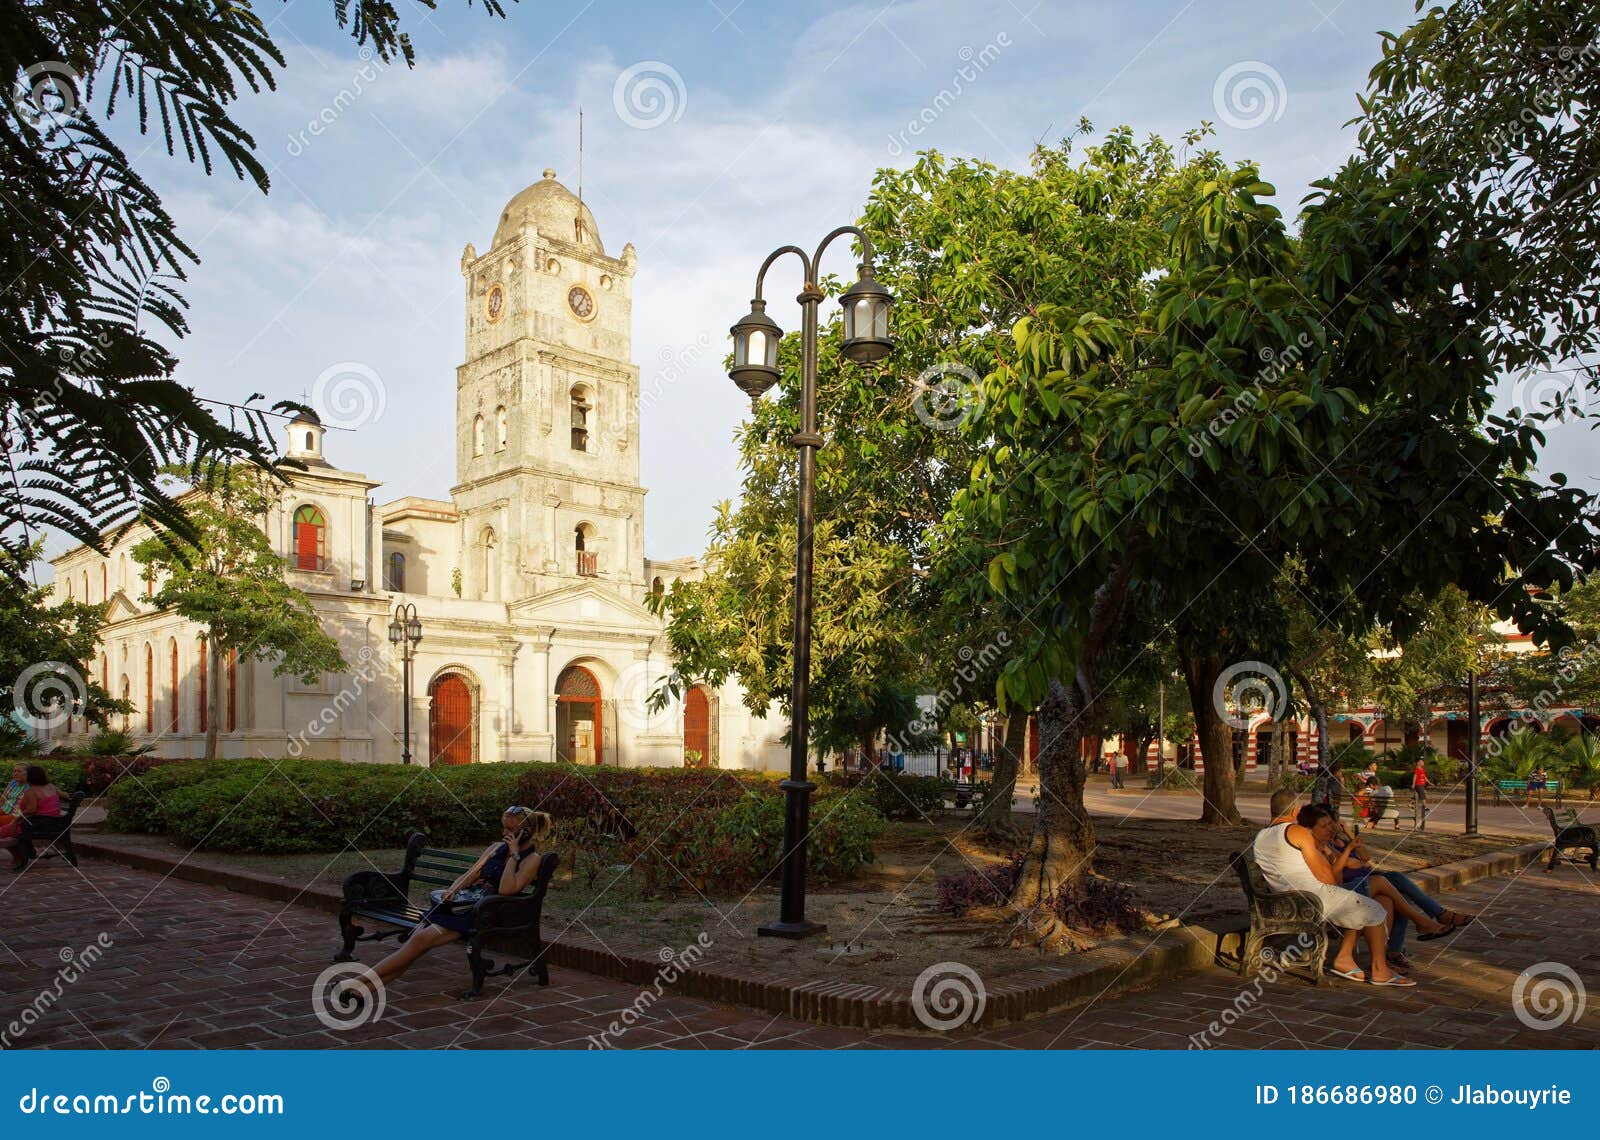 San JosÃ© Church in Holguin in Cuba Editorial Image - Image of historical,  cathedral: 186686980